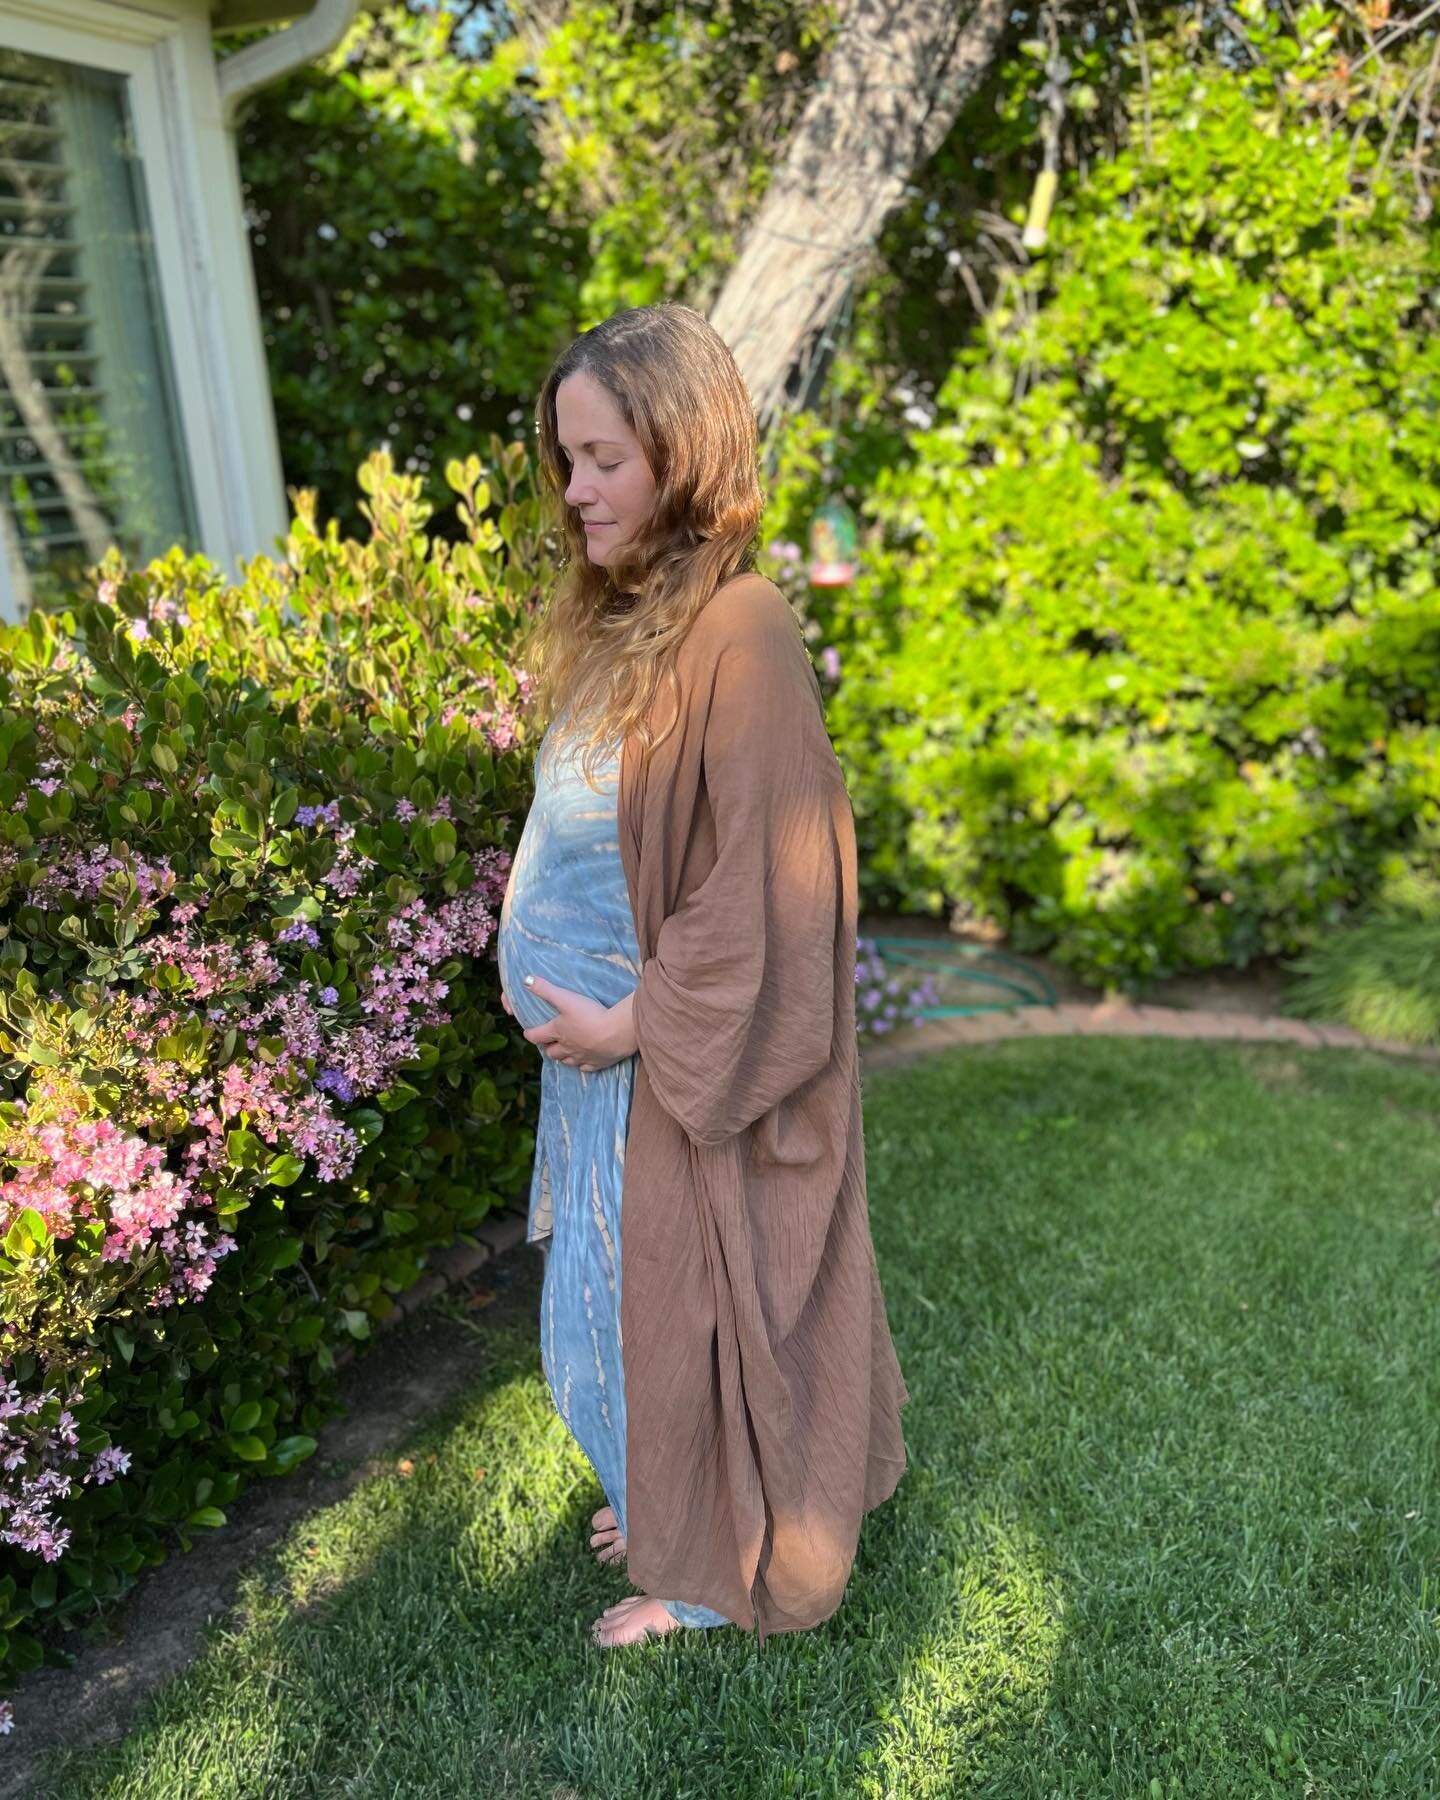 🤰🏼Baby Jackhaus coming this fall! 💞 Keep reading for deep reflections on fear&hellip;and growth. Because those of you who know me well know that this decision was not one that was made lightly... 🤣

I&rsquo;d say a solid 75% of my journal entries